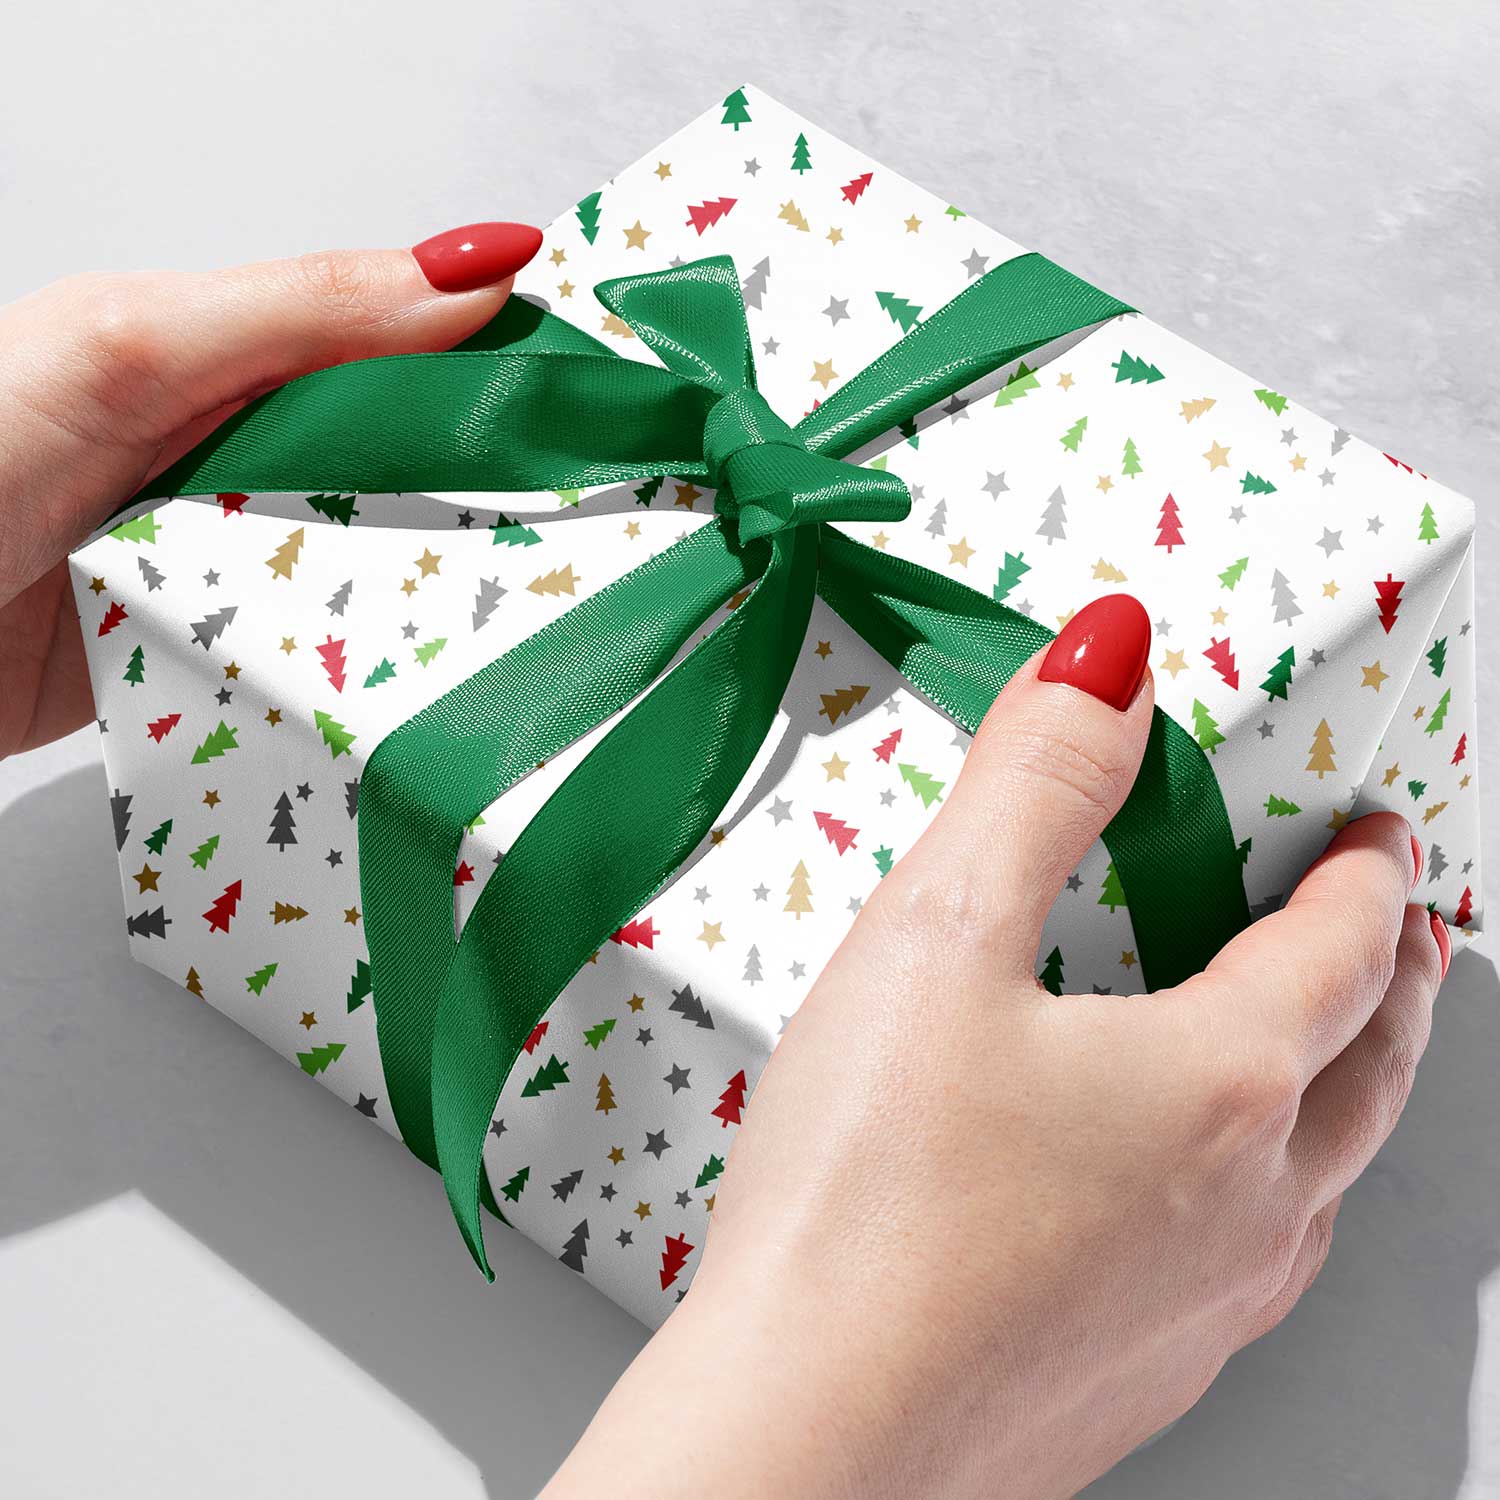 Does Santa Wrap Presents? Here's What You Should Know